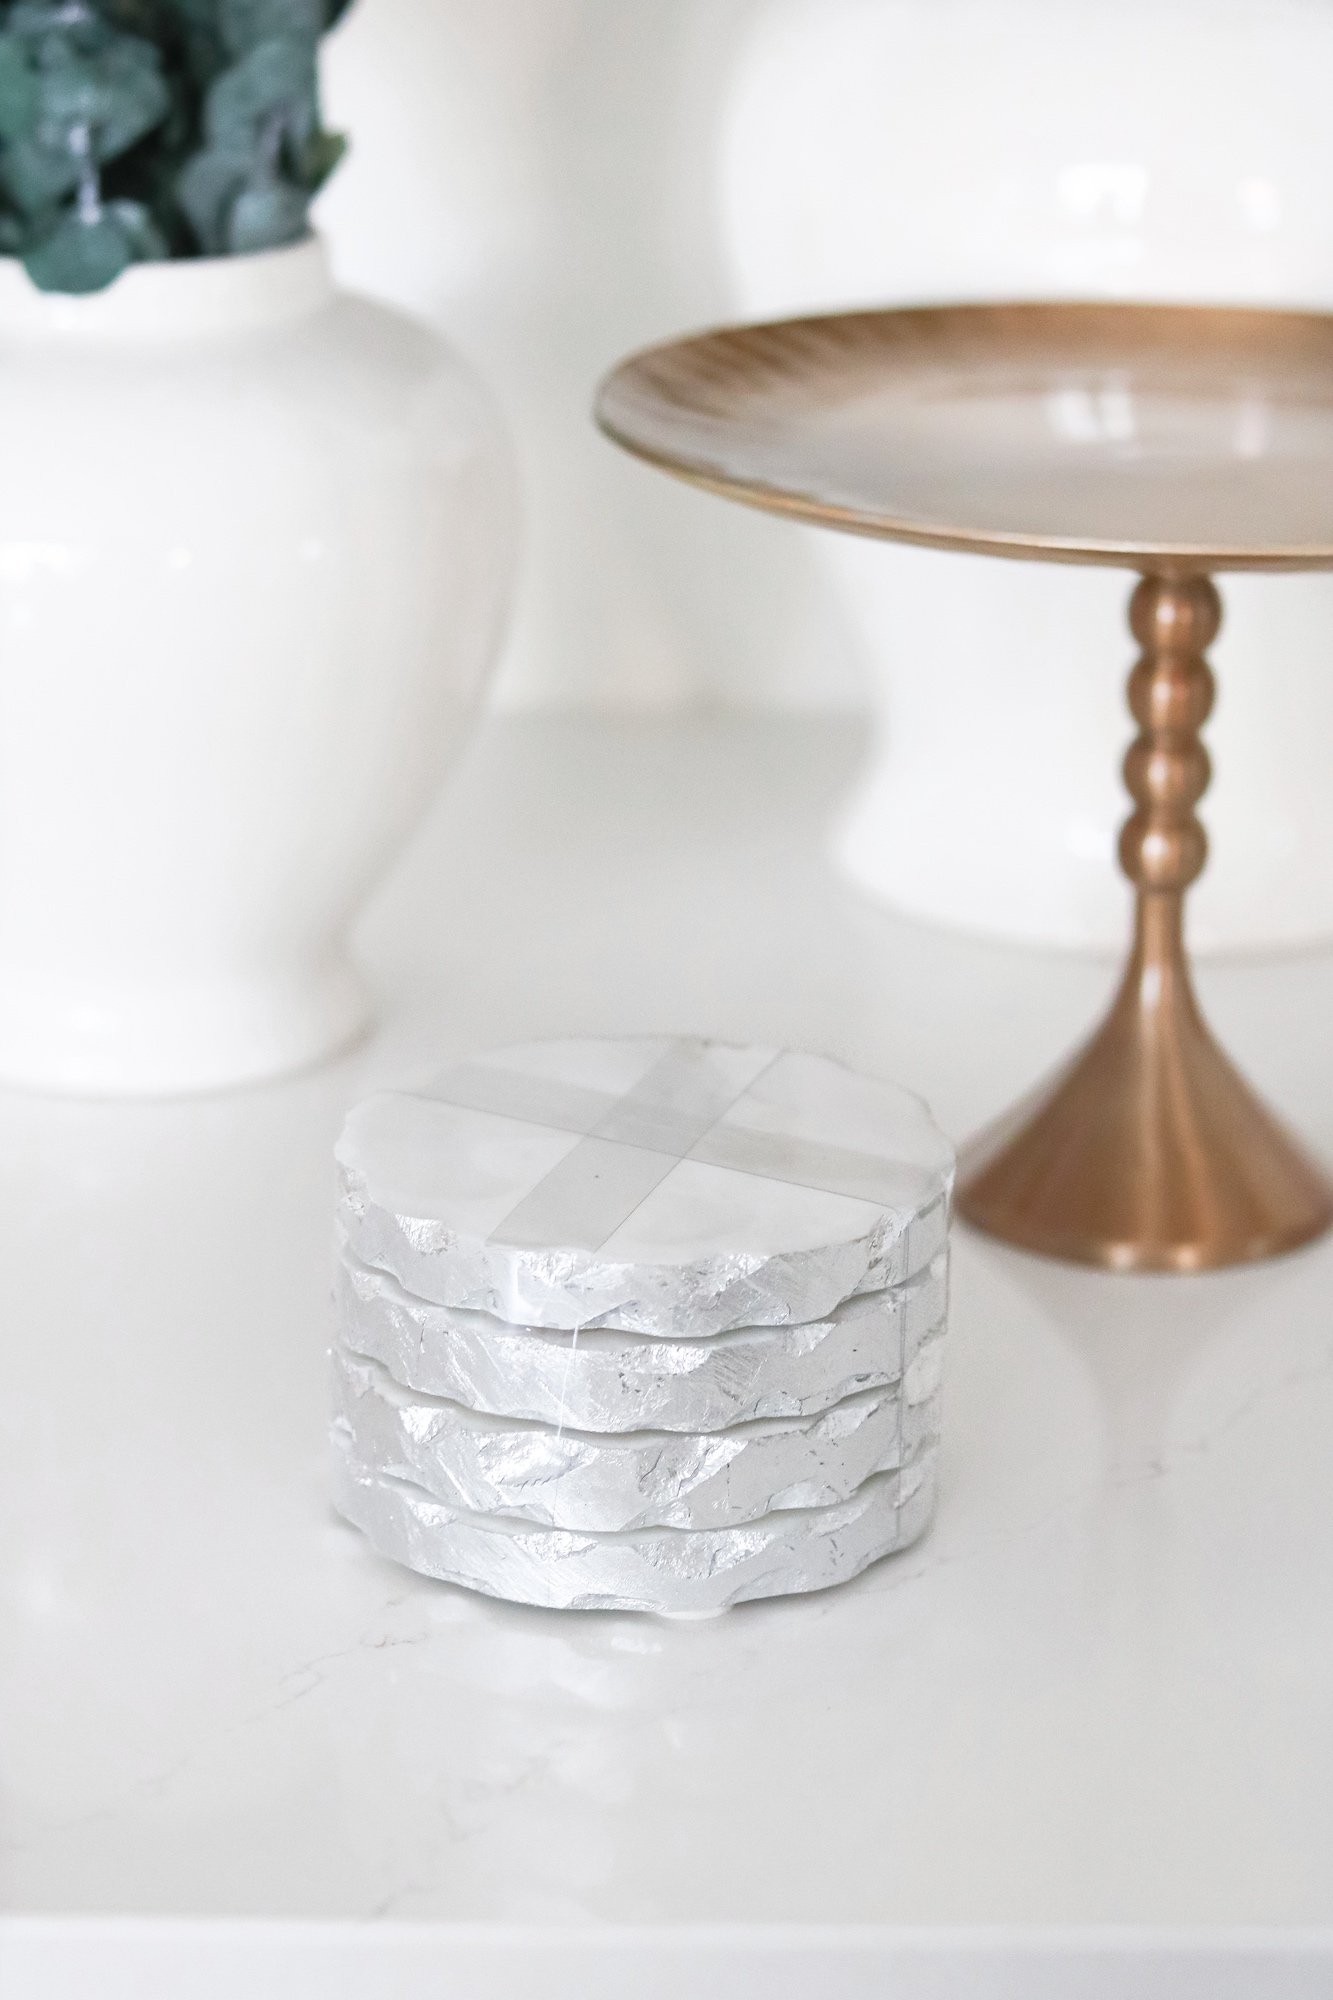 Brass cake stand and marble coaster